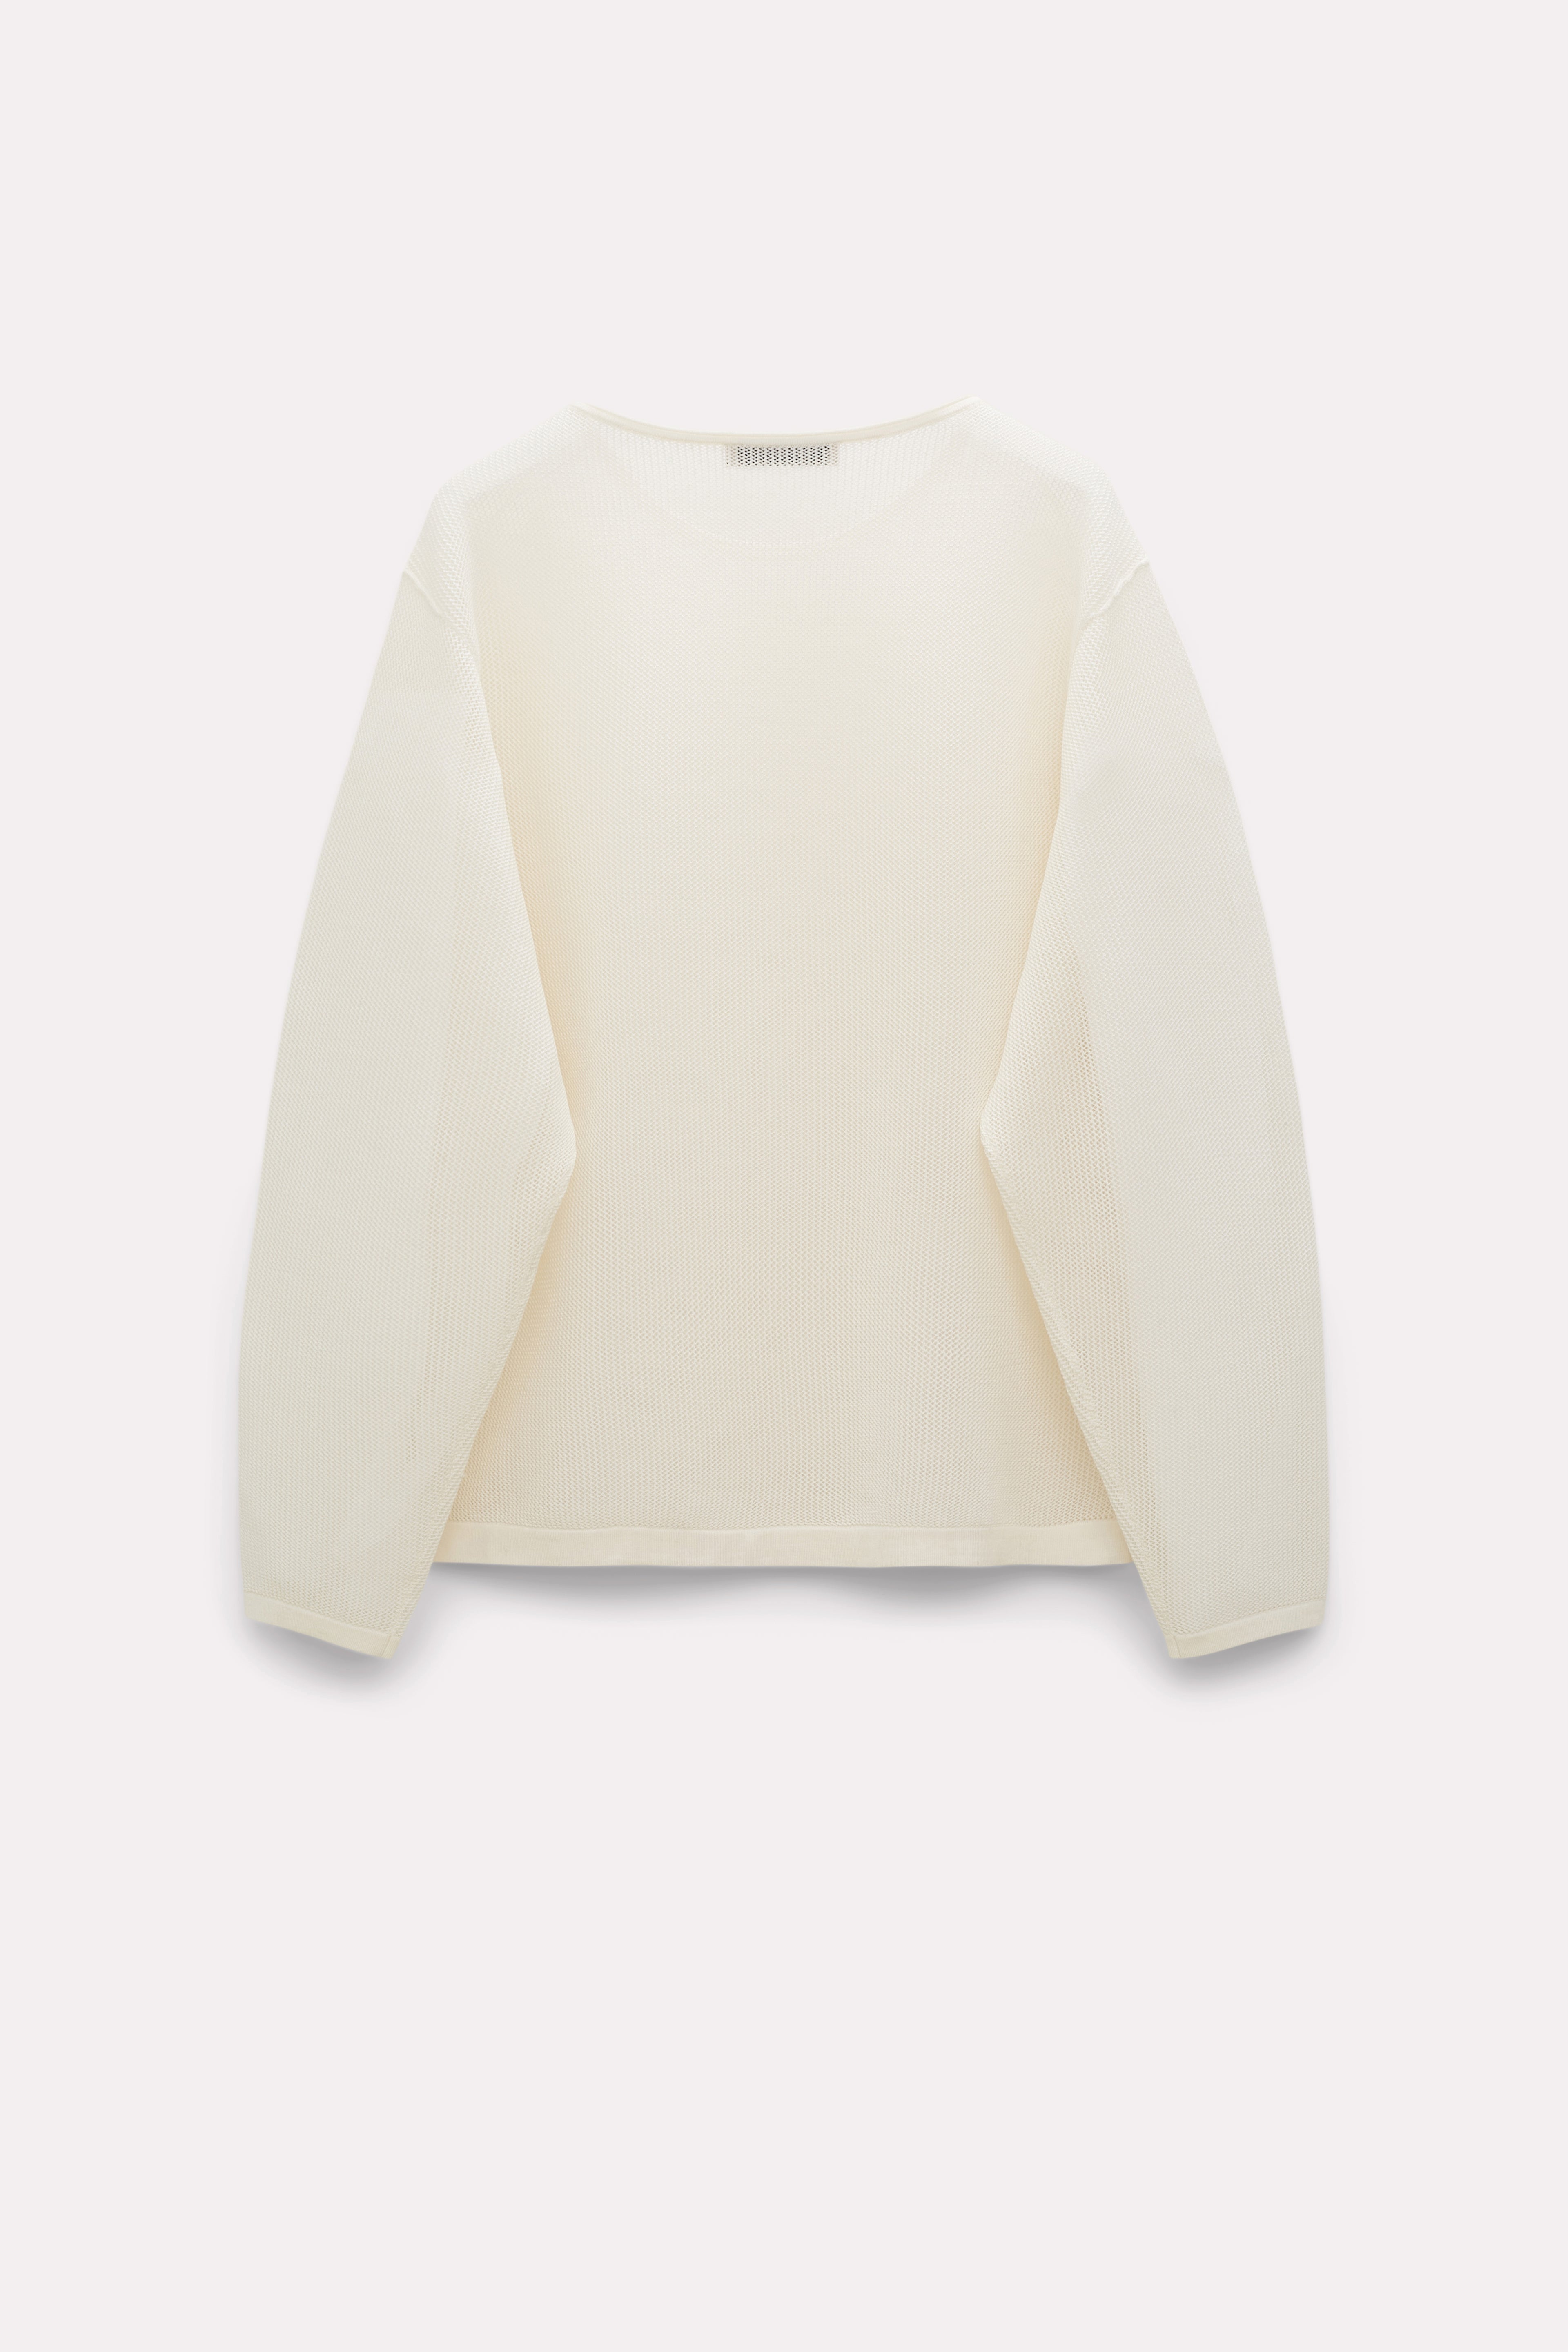 Dorothee-Schumacher-OUTLET-SALE-ESSENTIAL-EASE-pullover-Strick-ARCHIVE-COLLECTION-2_6befd3dc-e6aa-4993-9189-2d144d52b68f.jpg